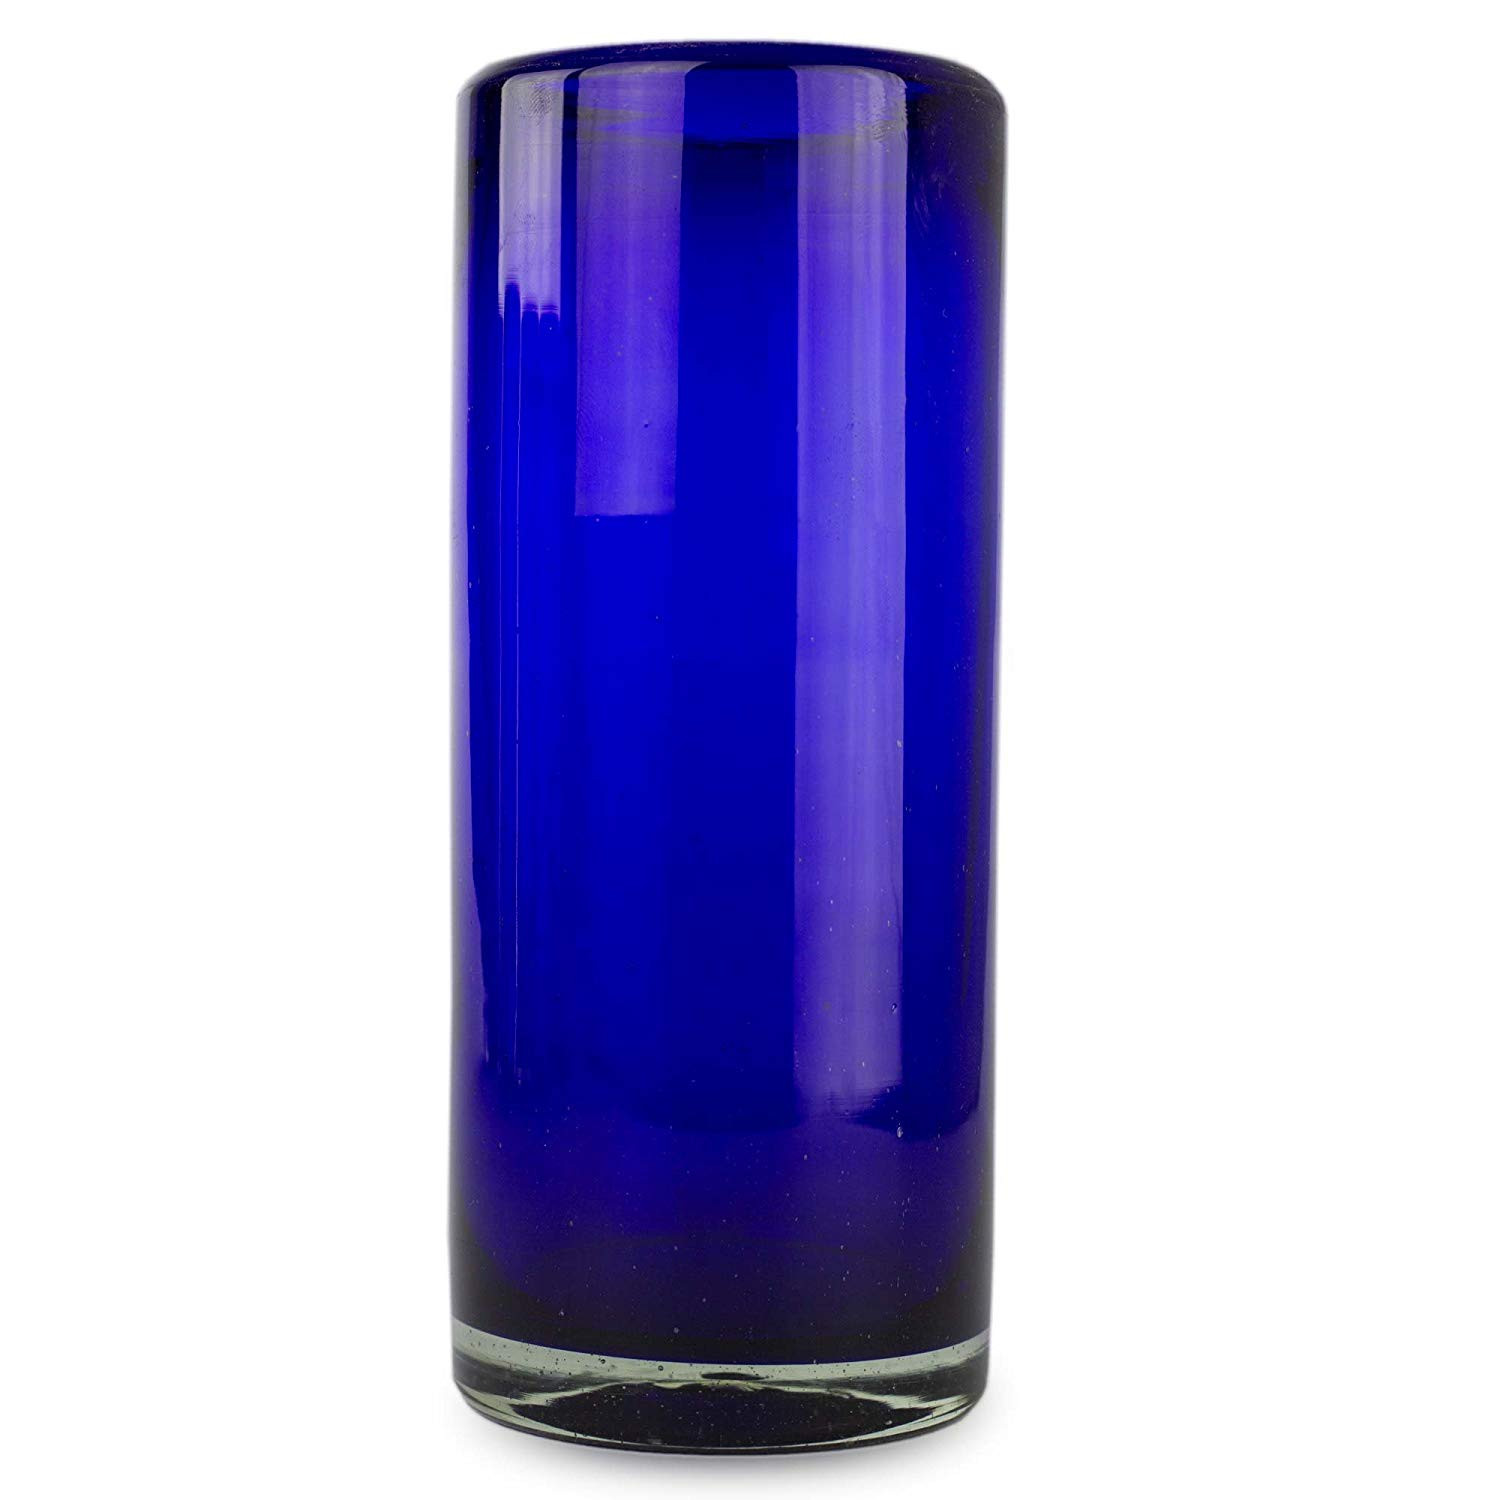 23 Nice Chihuly Glass Vase 2024 free download chihuly glass vase of amazon com novica artisan crafted dark blue recycled glass hand inside amazon com novica artisan crafted dark blue recycled glass hand blown cocktail glasses 13 oz pure